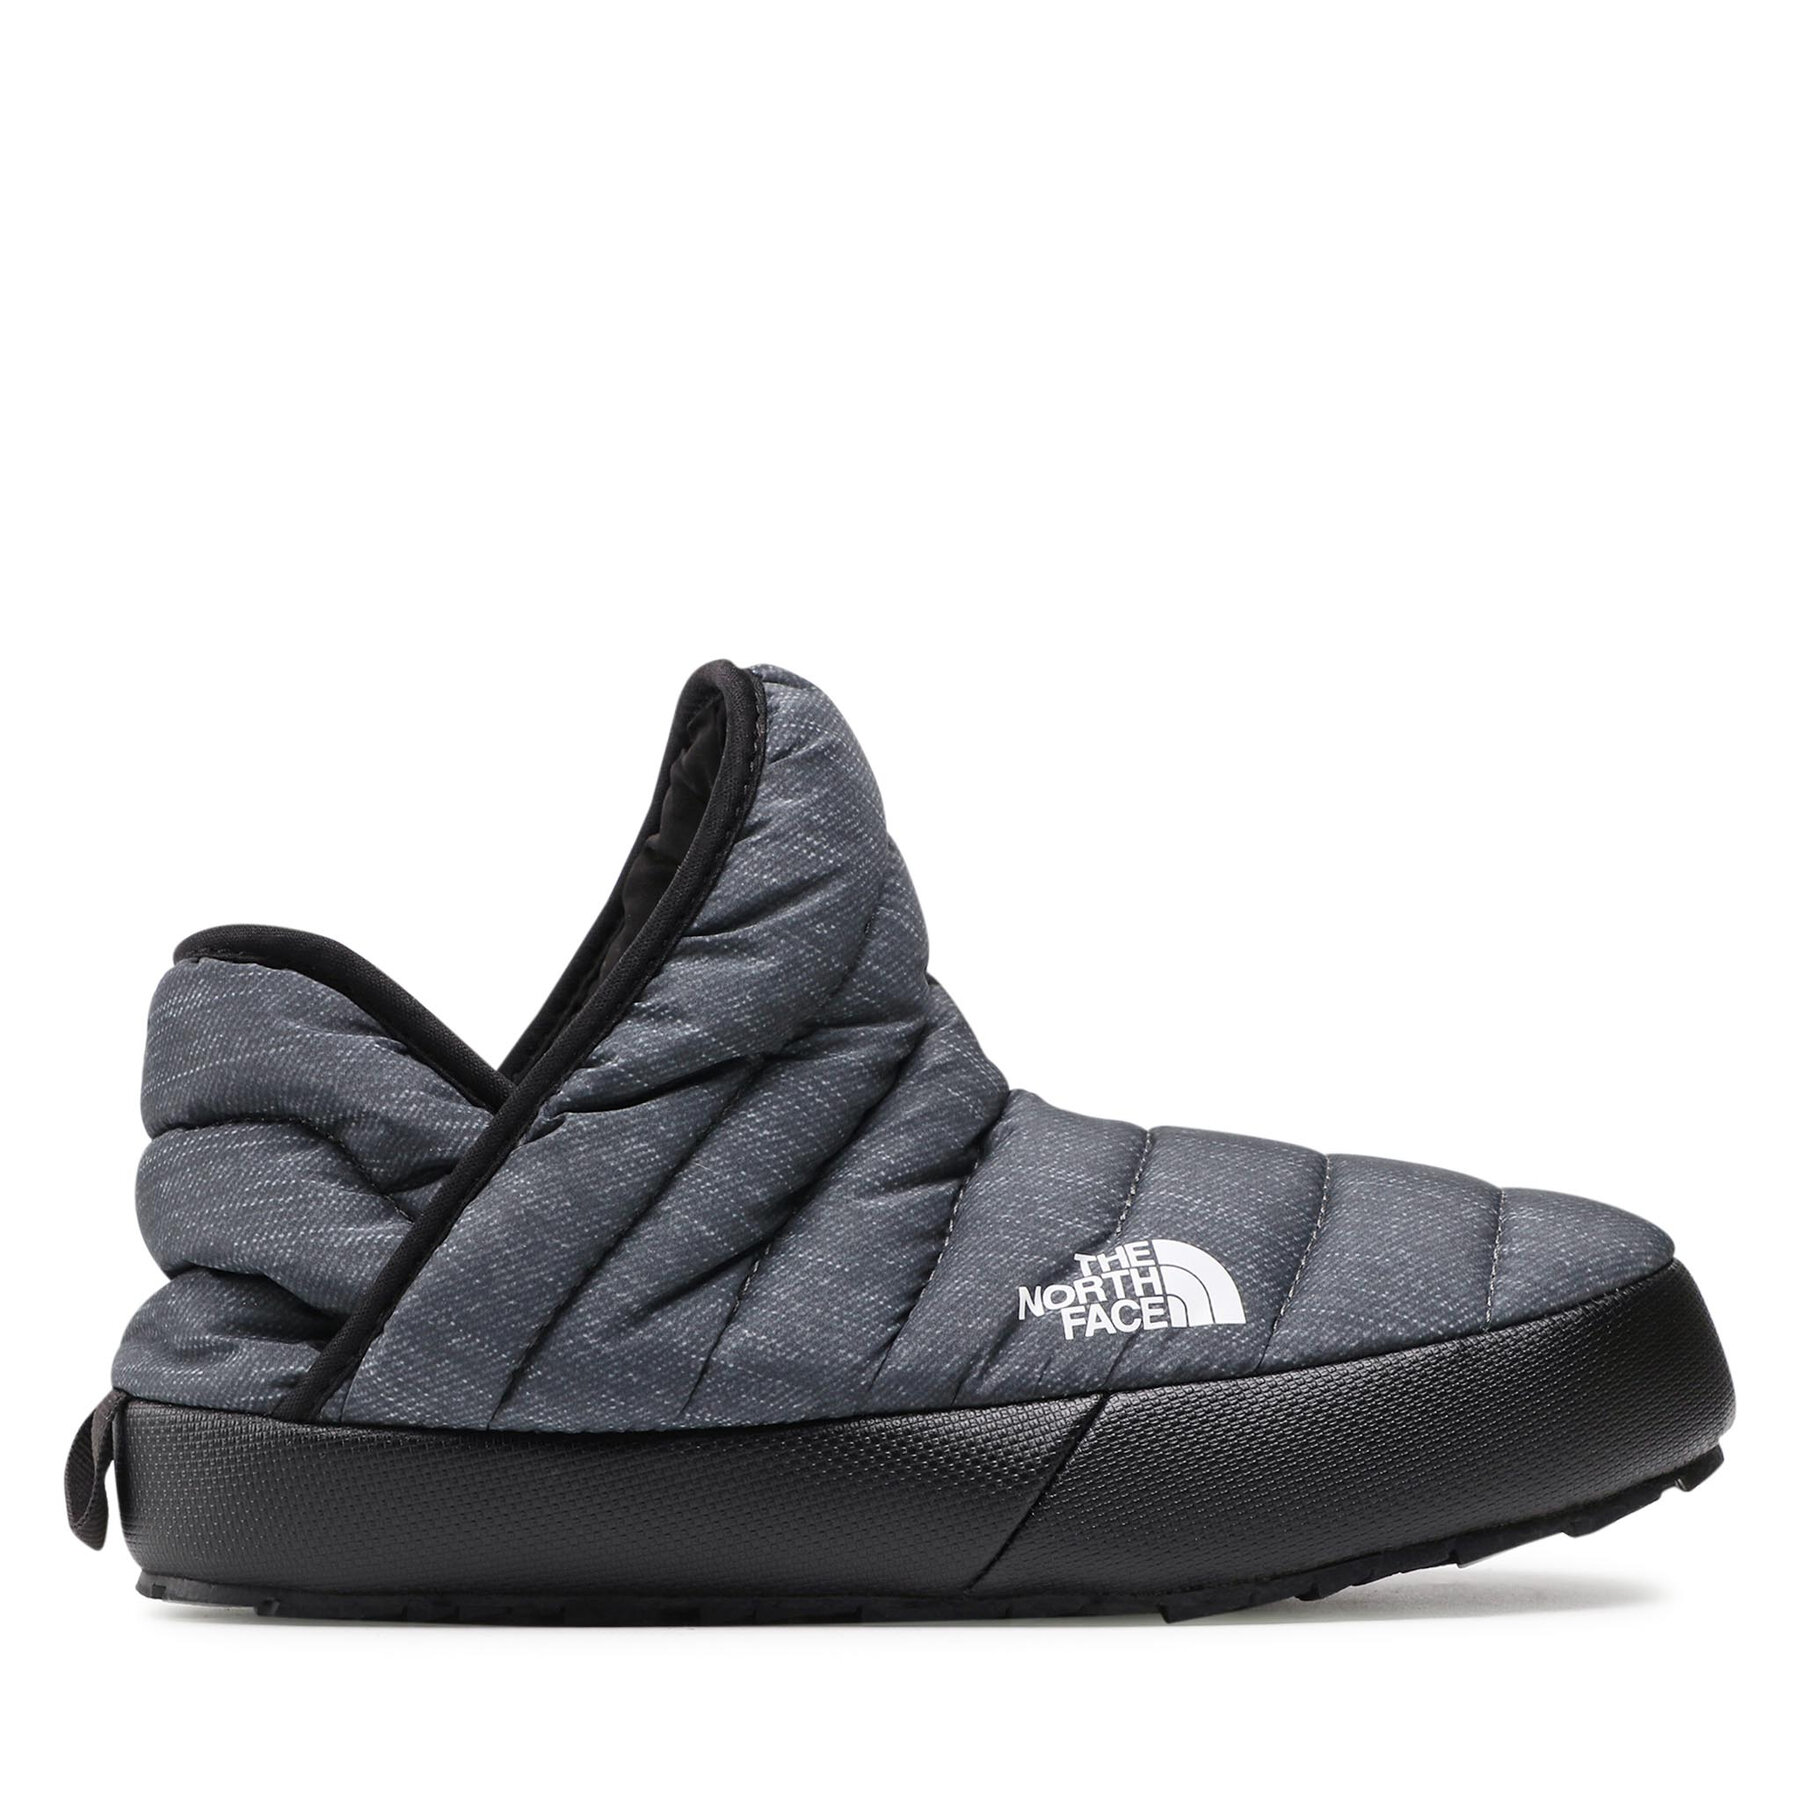 Hausschuhe The North Face Thermoball Traction Bootie NF0A331H4111 Phantom Grey Heather Print/Tnf Black von The North Face